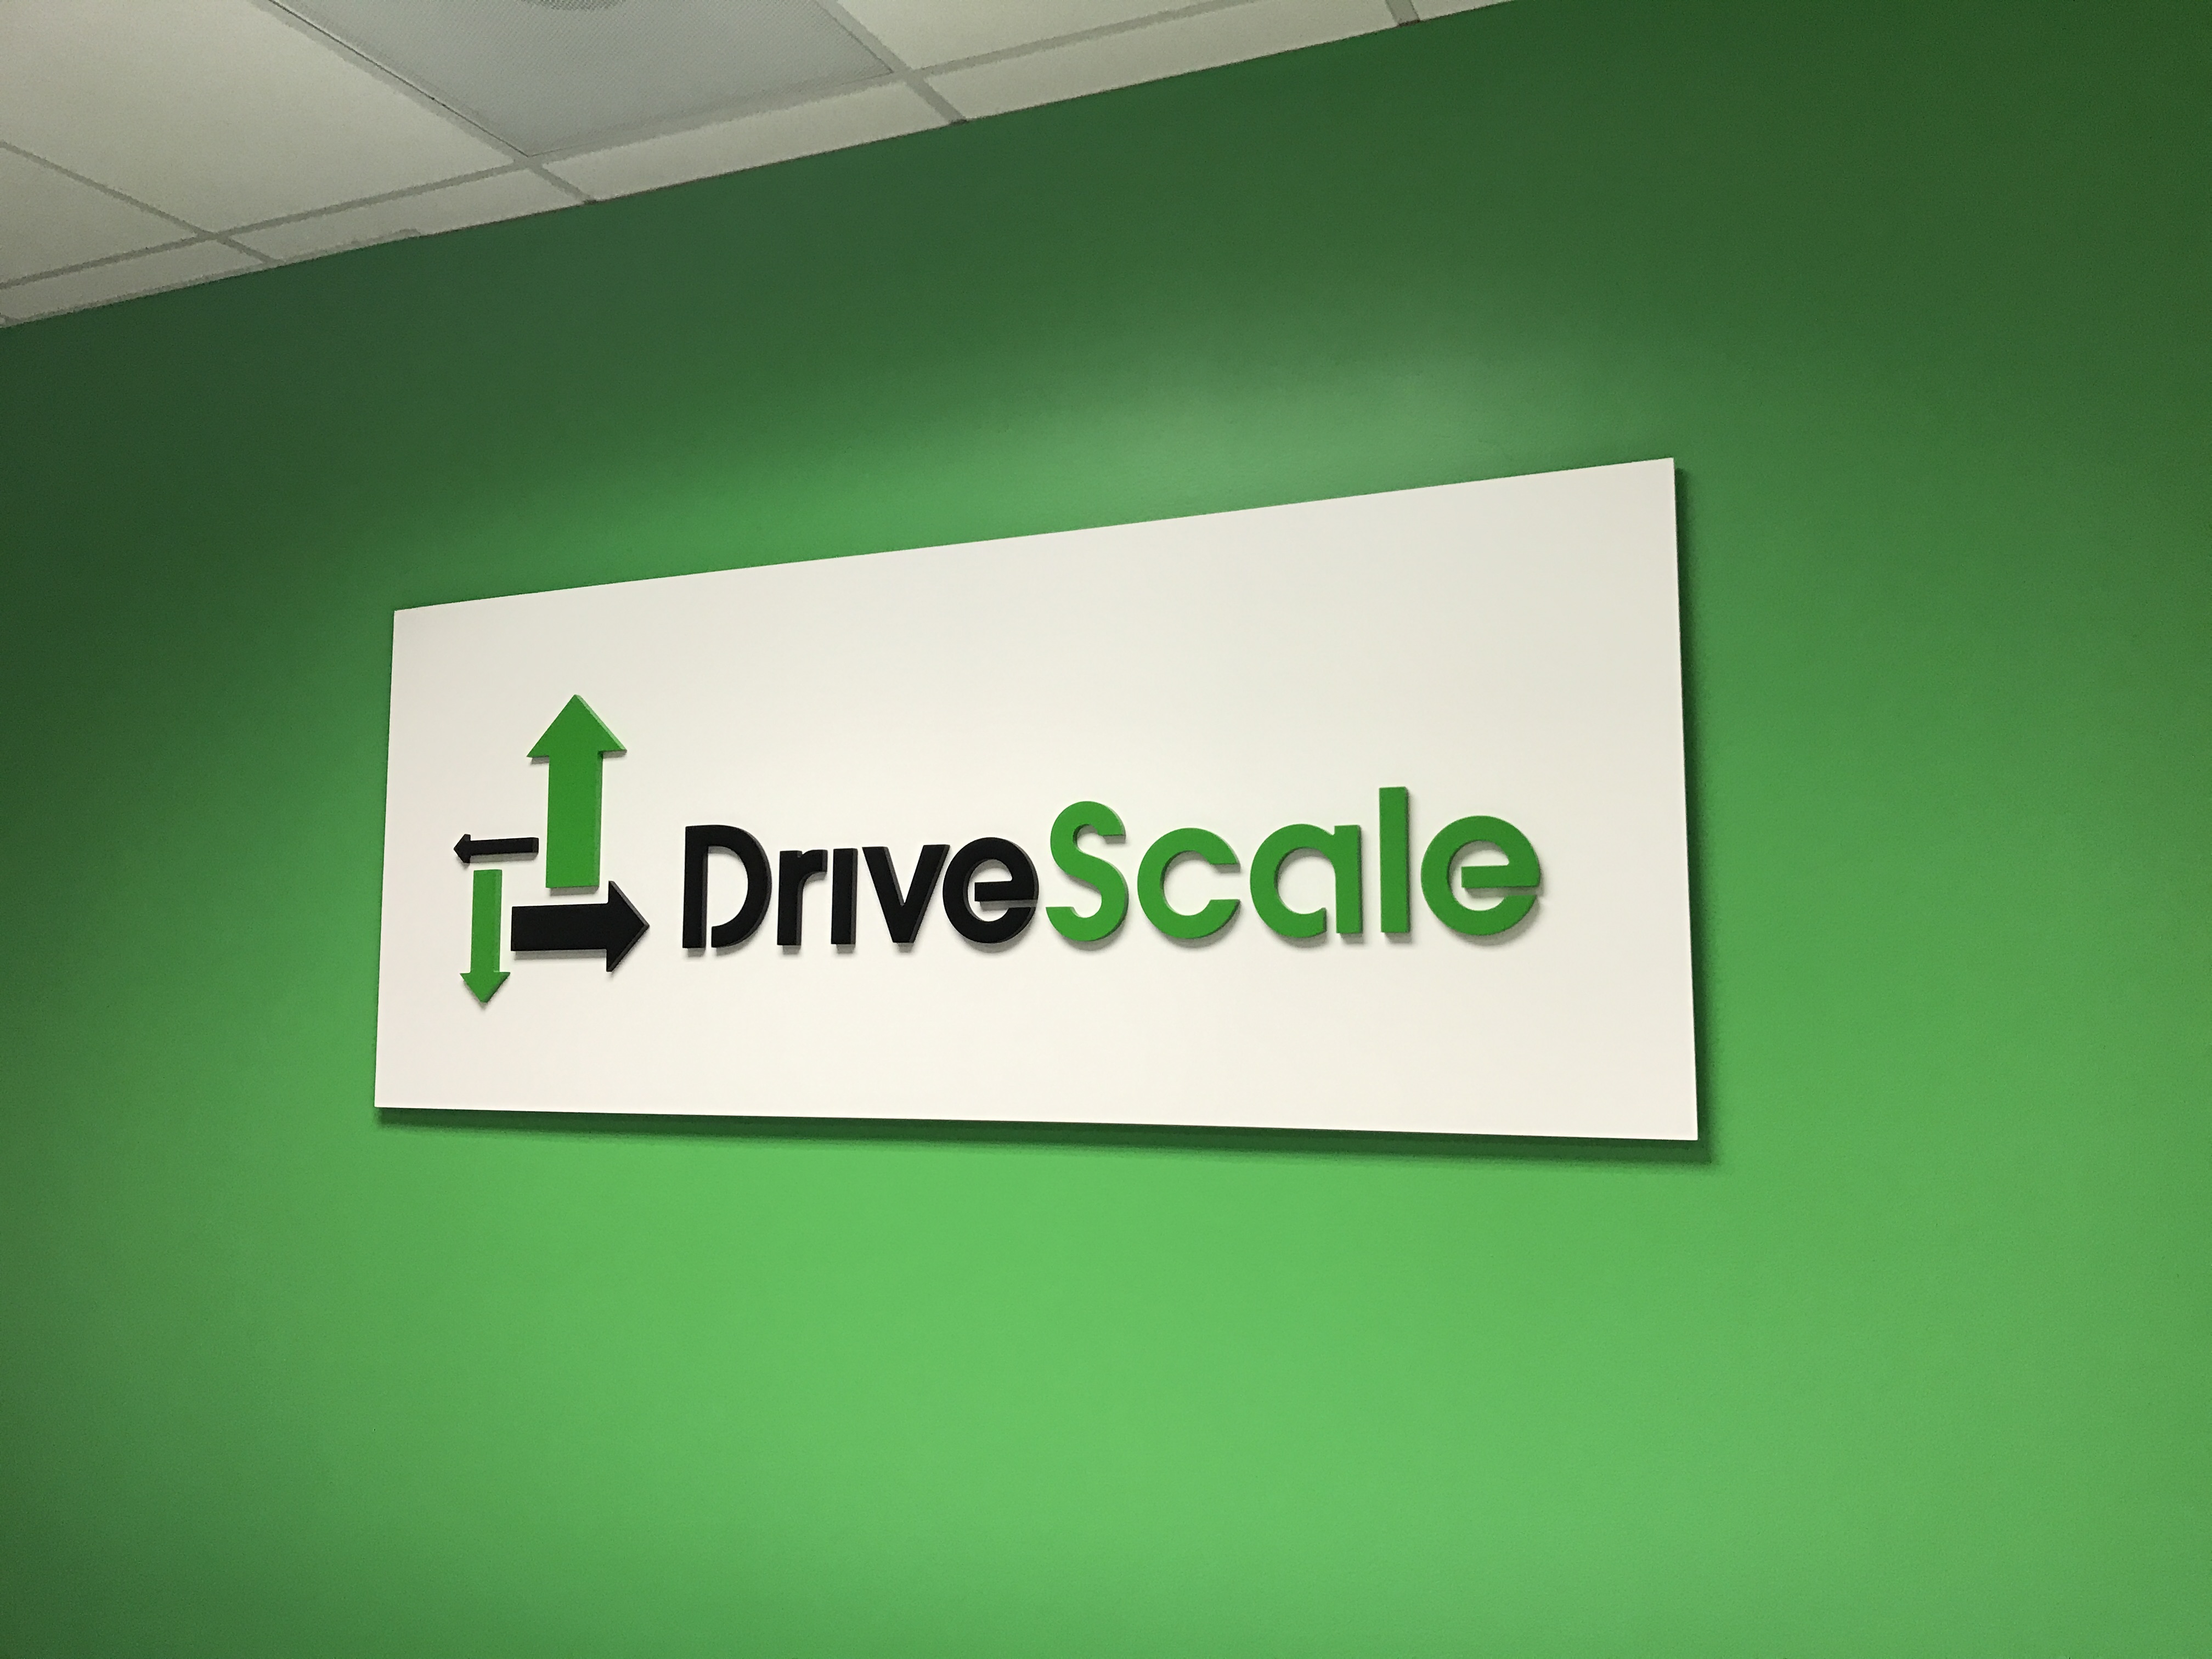 Photo from the DriveScale office